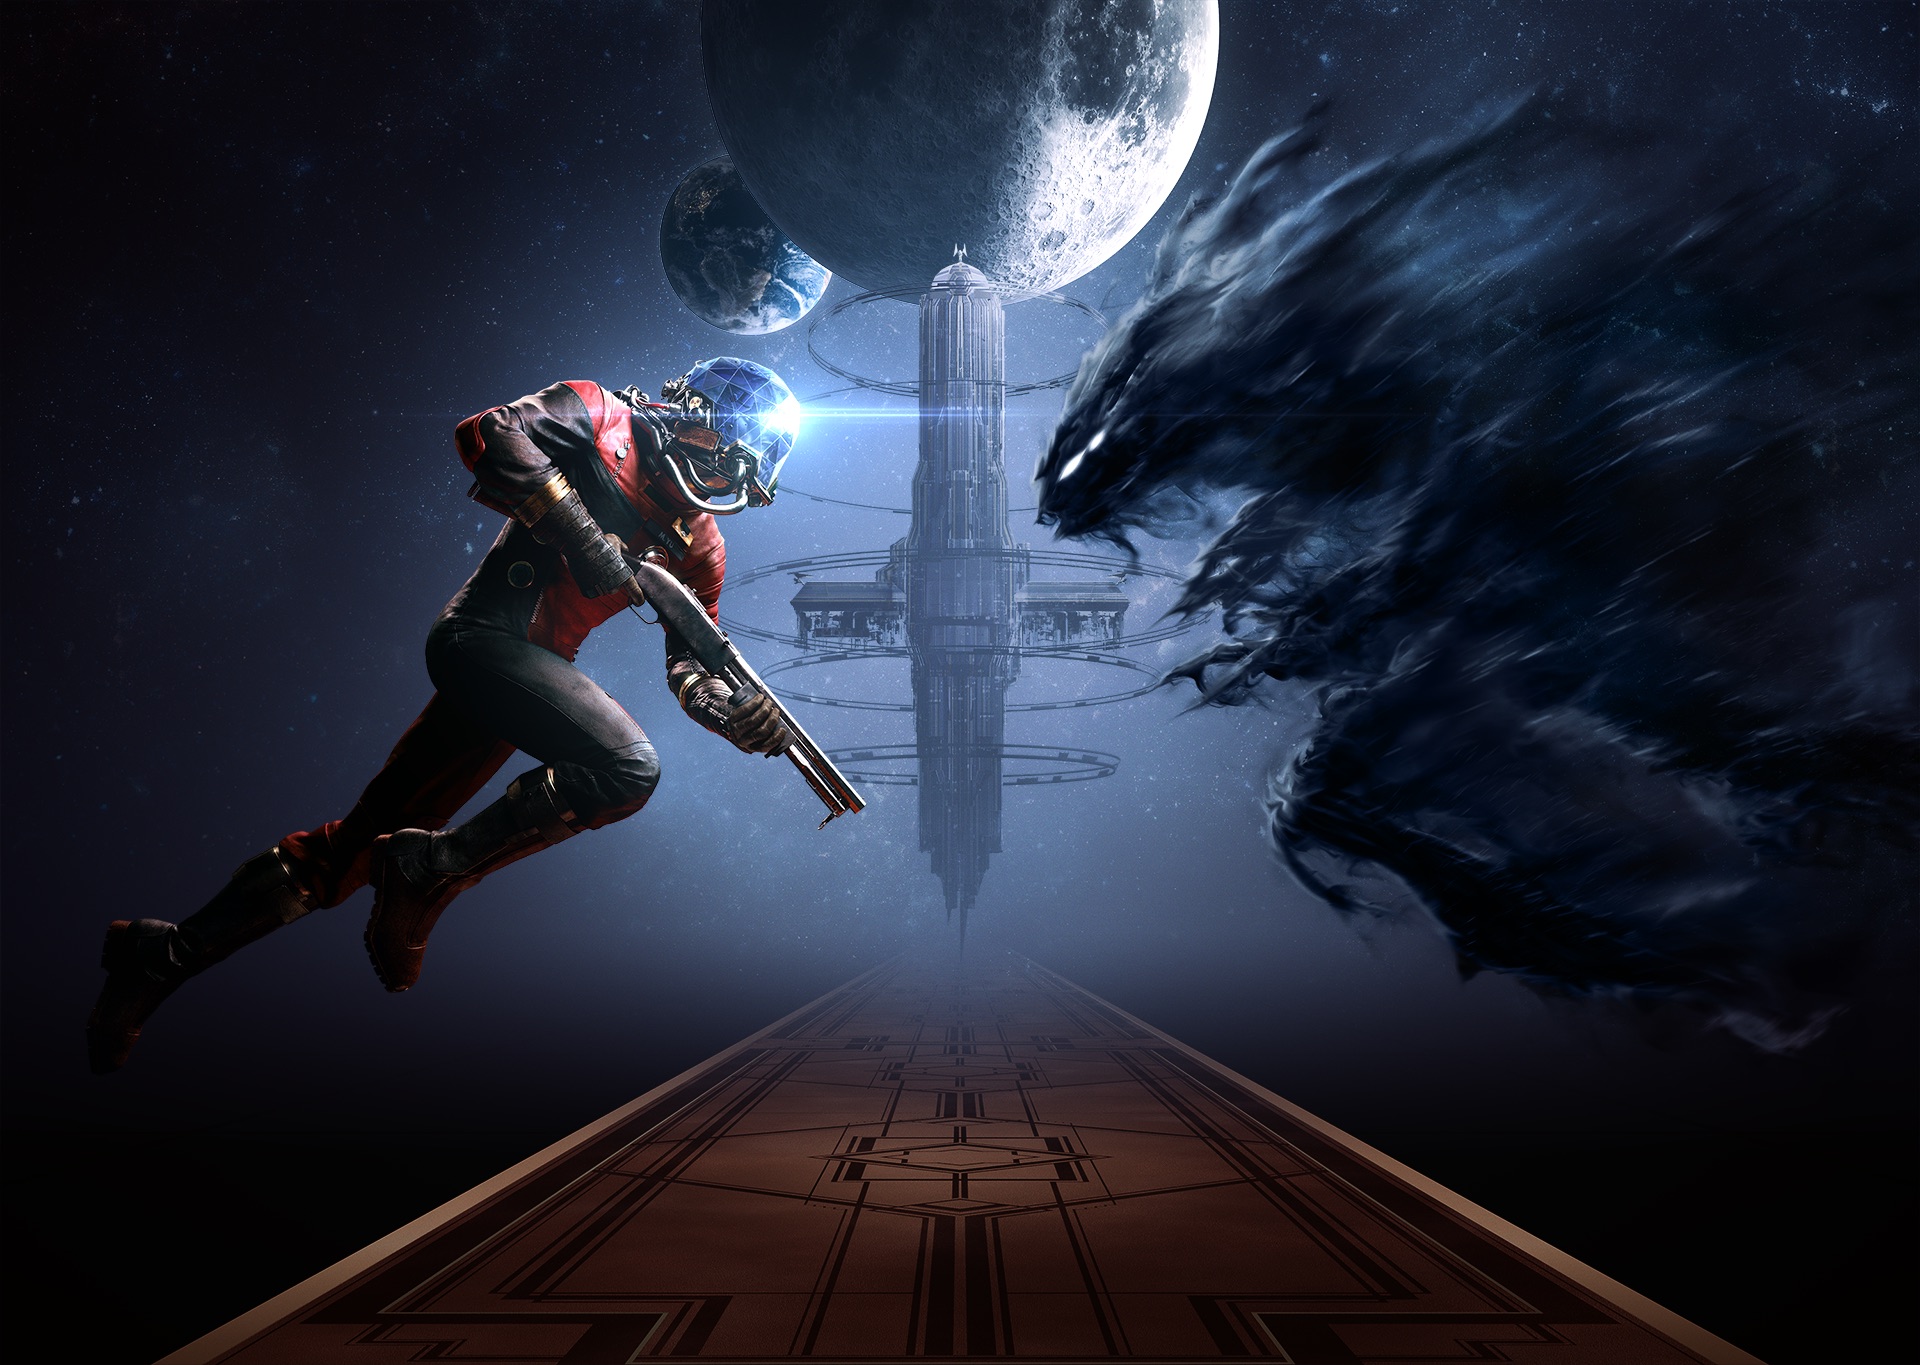 2017’s best game, Prey, is free on Epic Games Store